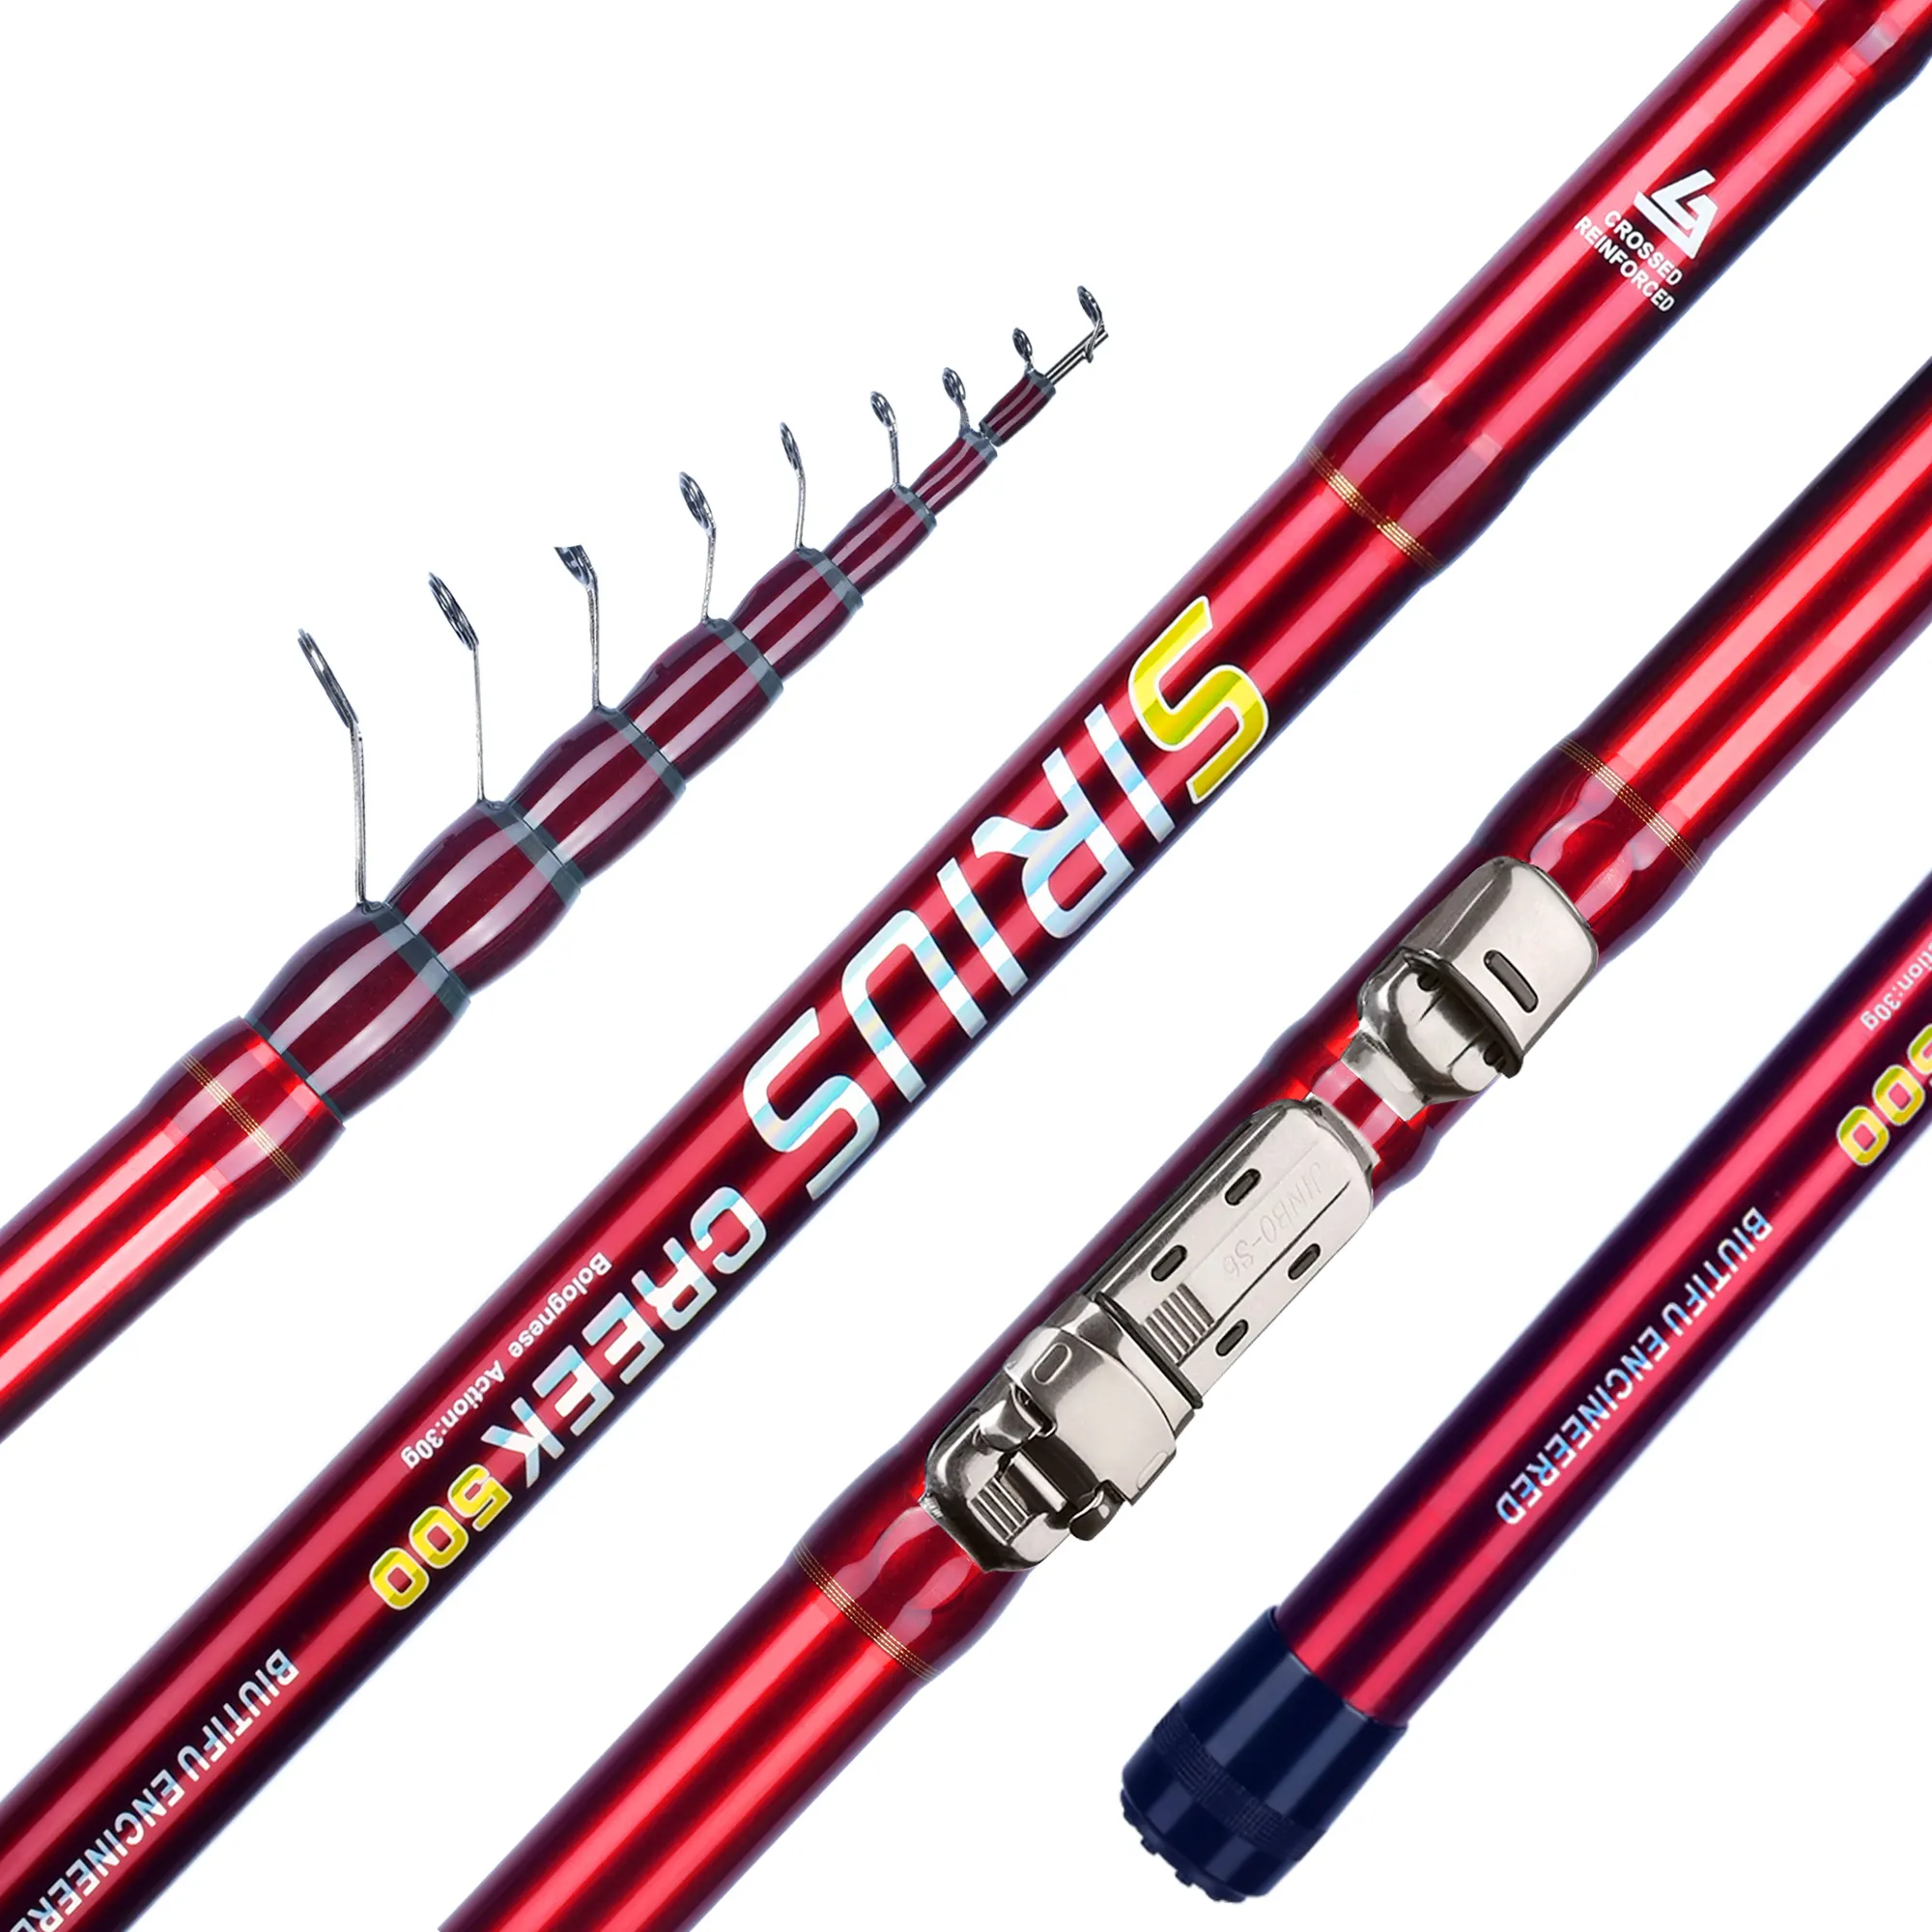 Telescopic Fishing Rod 4/4.5/5/5.5/6/6.5m T800 Carbon Travel UltraLight Spinning Float Outdoor 30g Trout Bolognese Pole